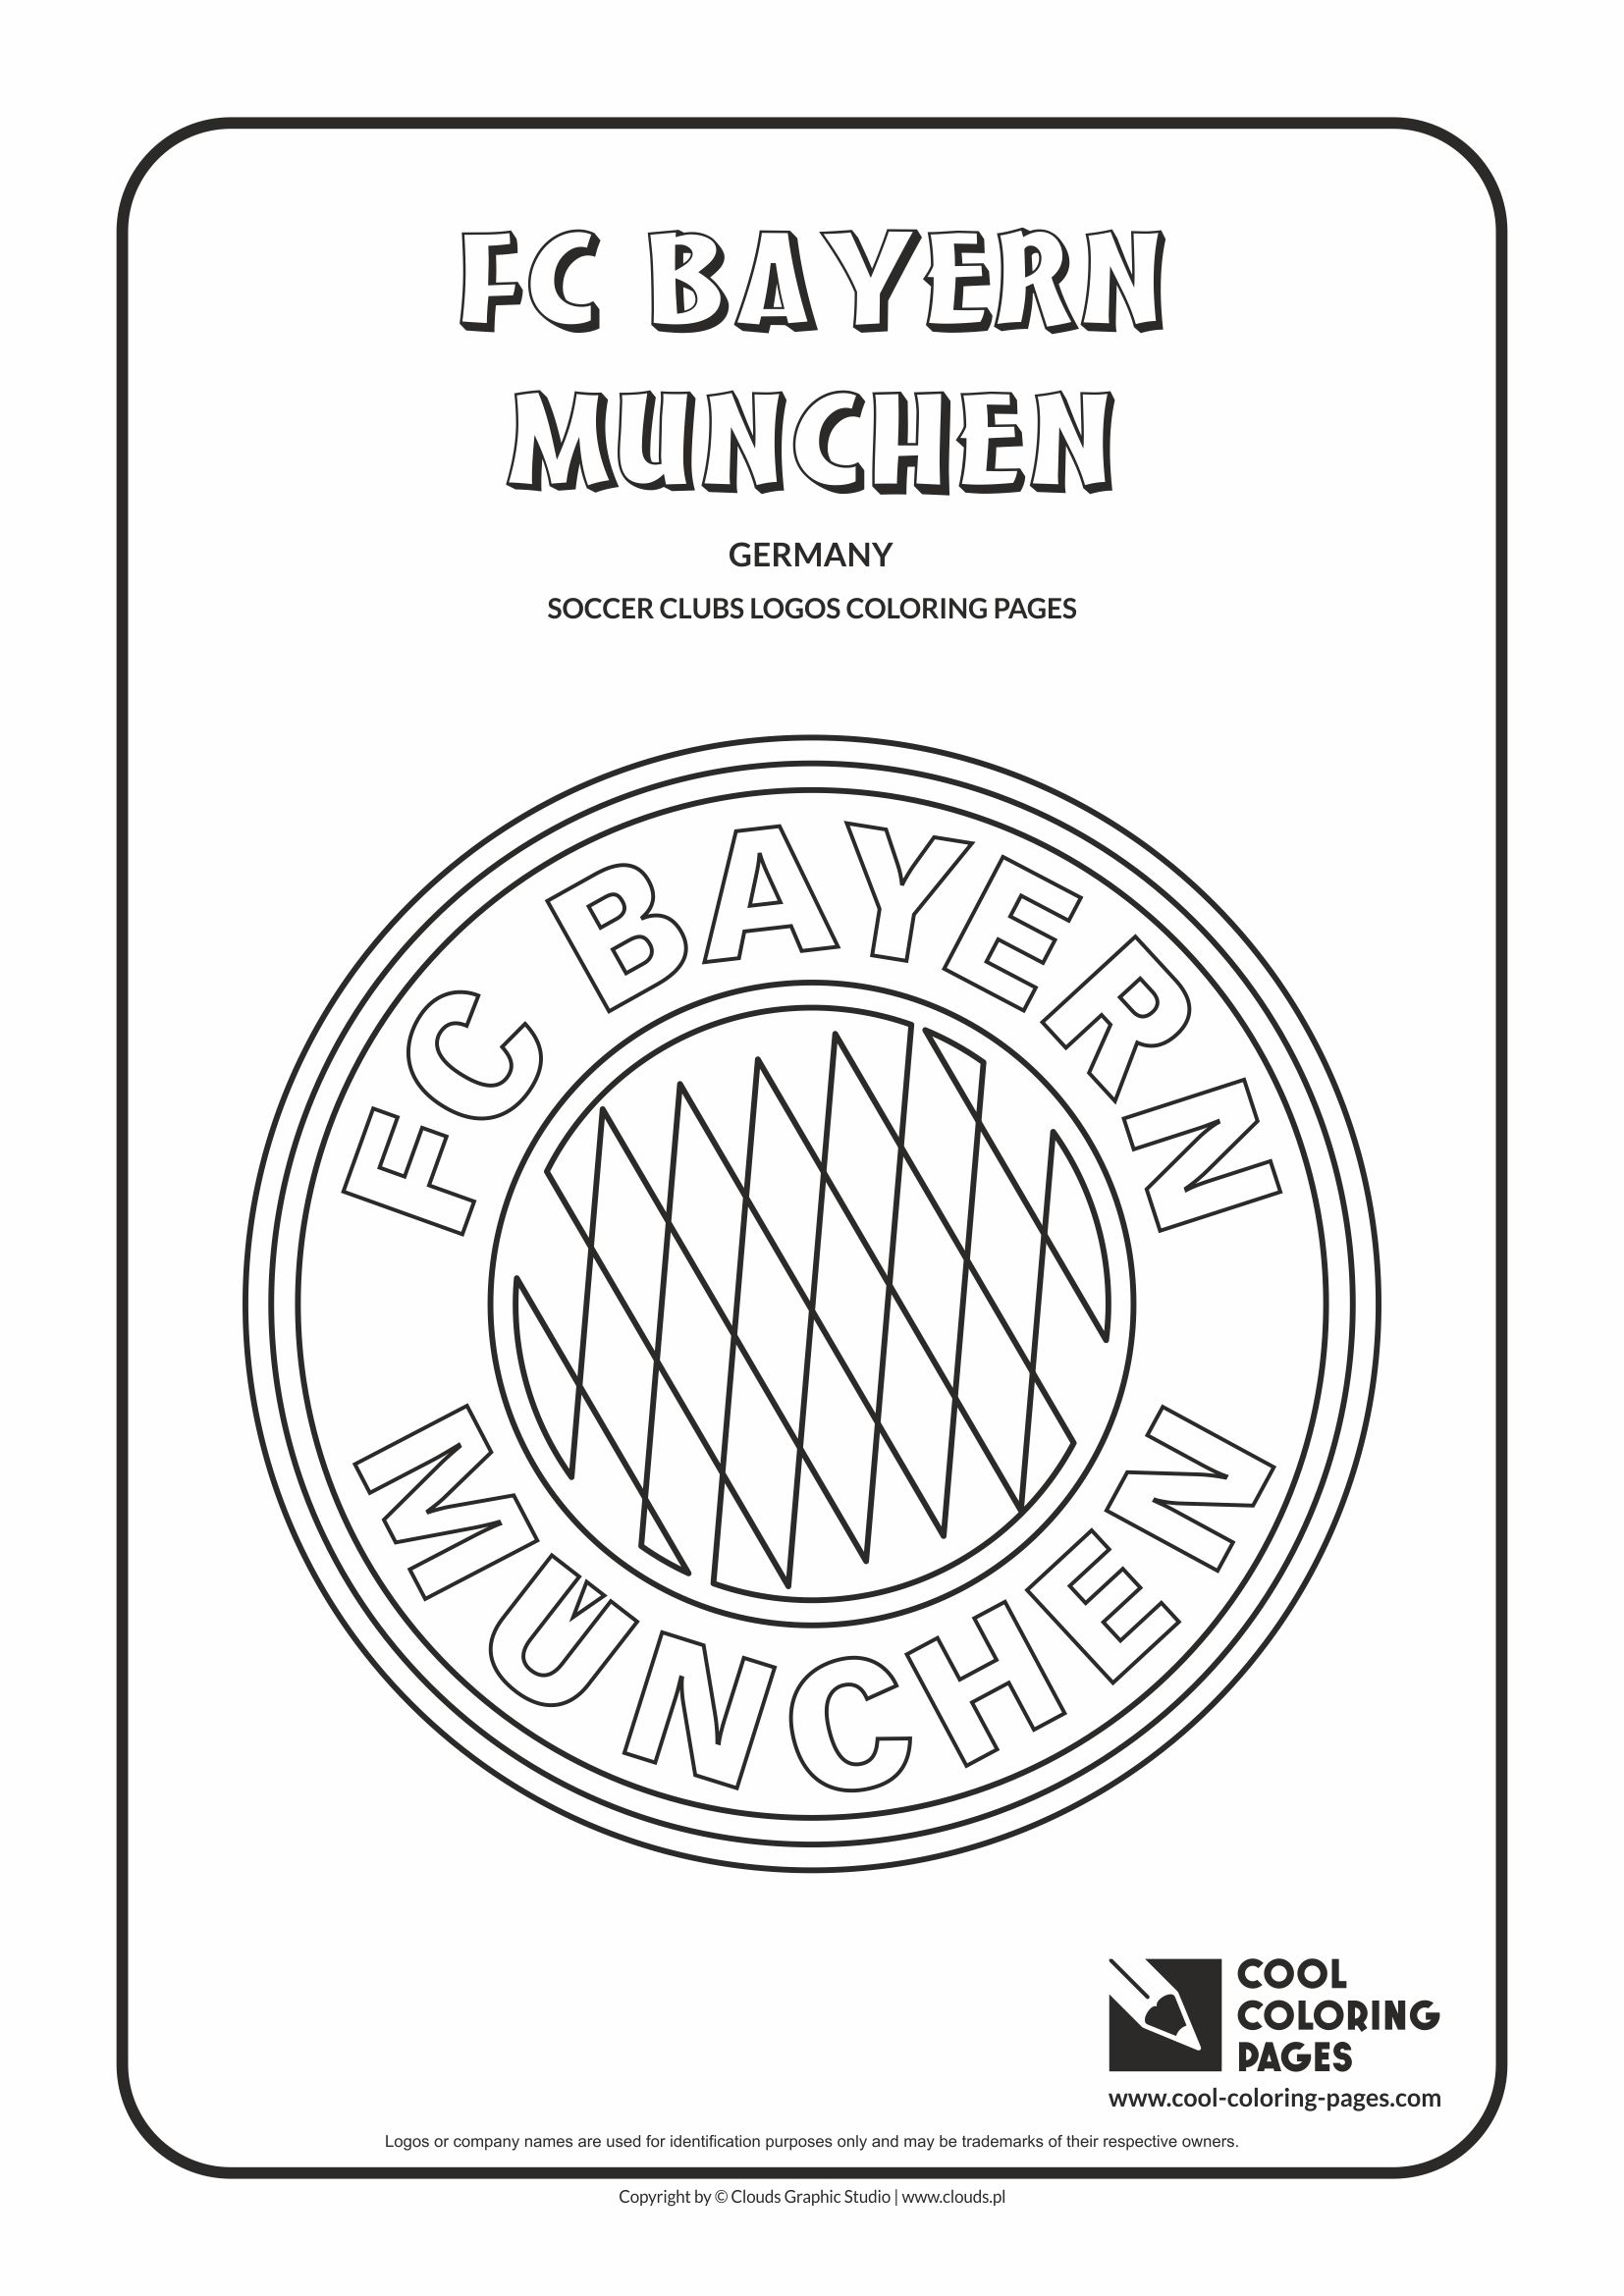 Cool Coloring Pages - Soccer Club Logos / FC Bayern Munchen logo / Coloring page with FC Bayern Munchen logo